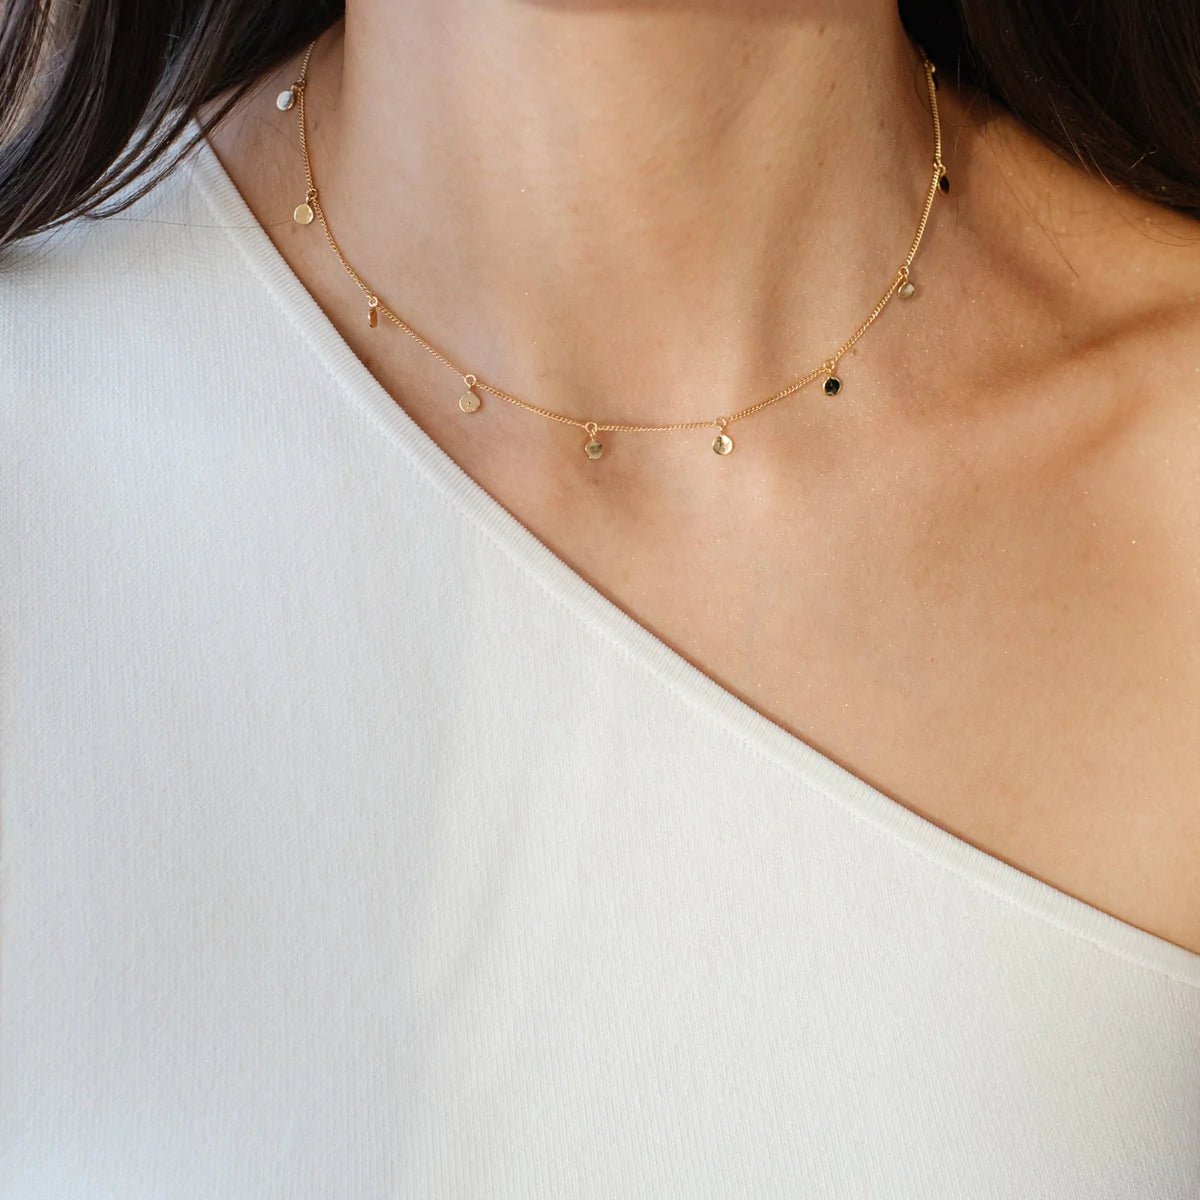 DAINTY POISE DISK NECKLACE - CUBIC ZIRCONIA &amp; GOLD - SO PRETTY CARA COTTER